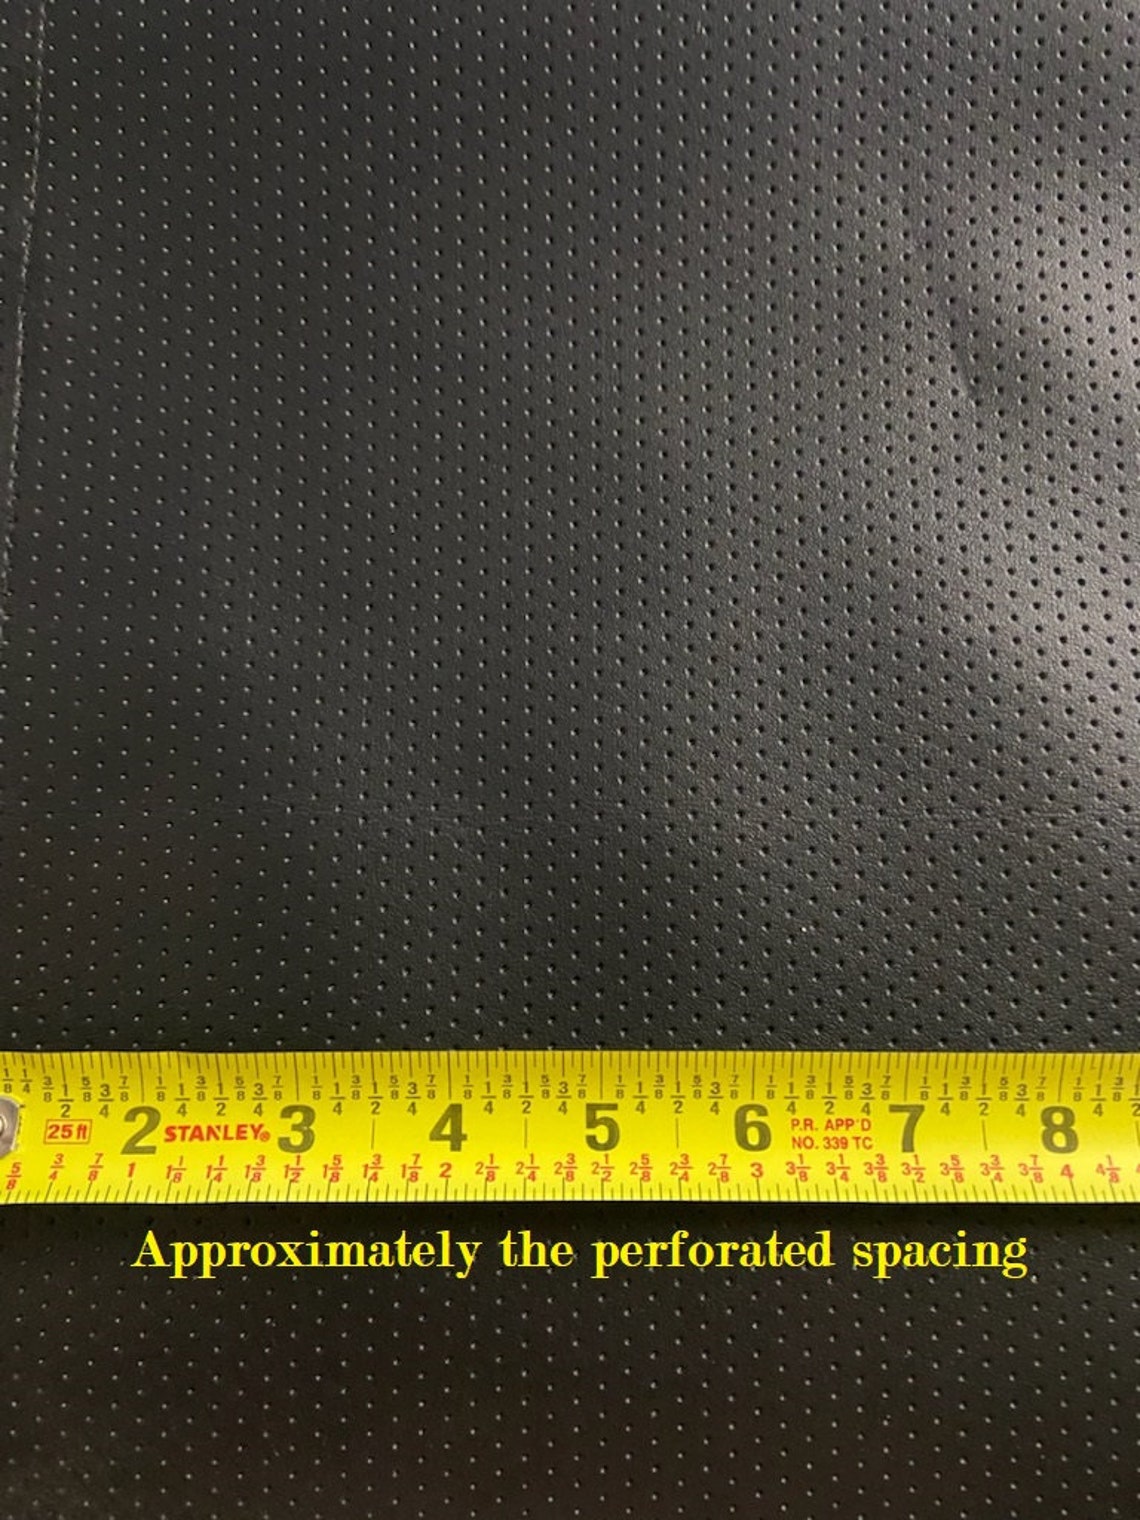 Black Perforated Commercial Marine Grade Upholstery Vinyls - Etsy